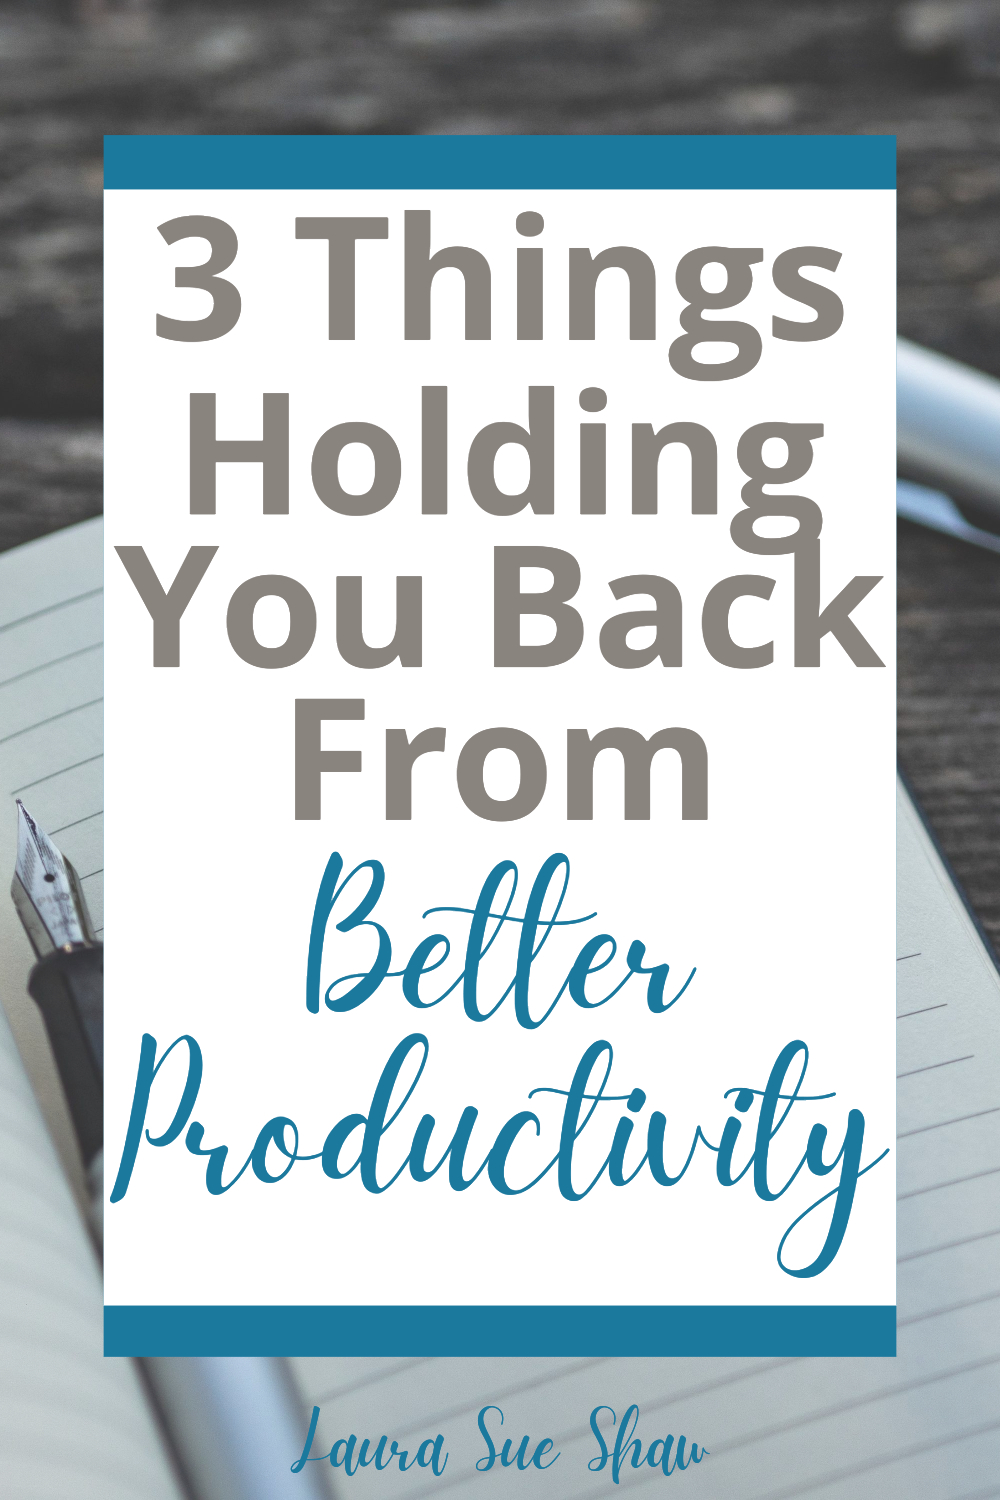 3 things holding you back from better productivity